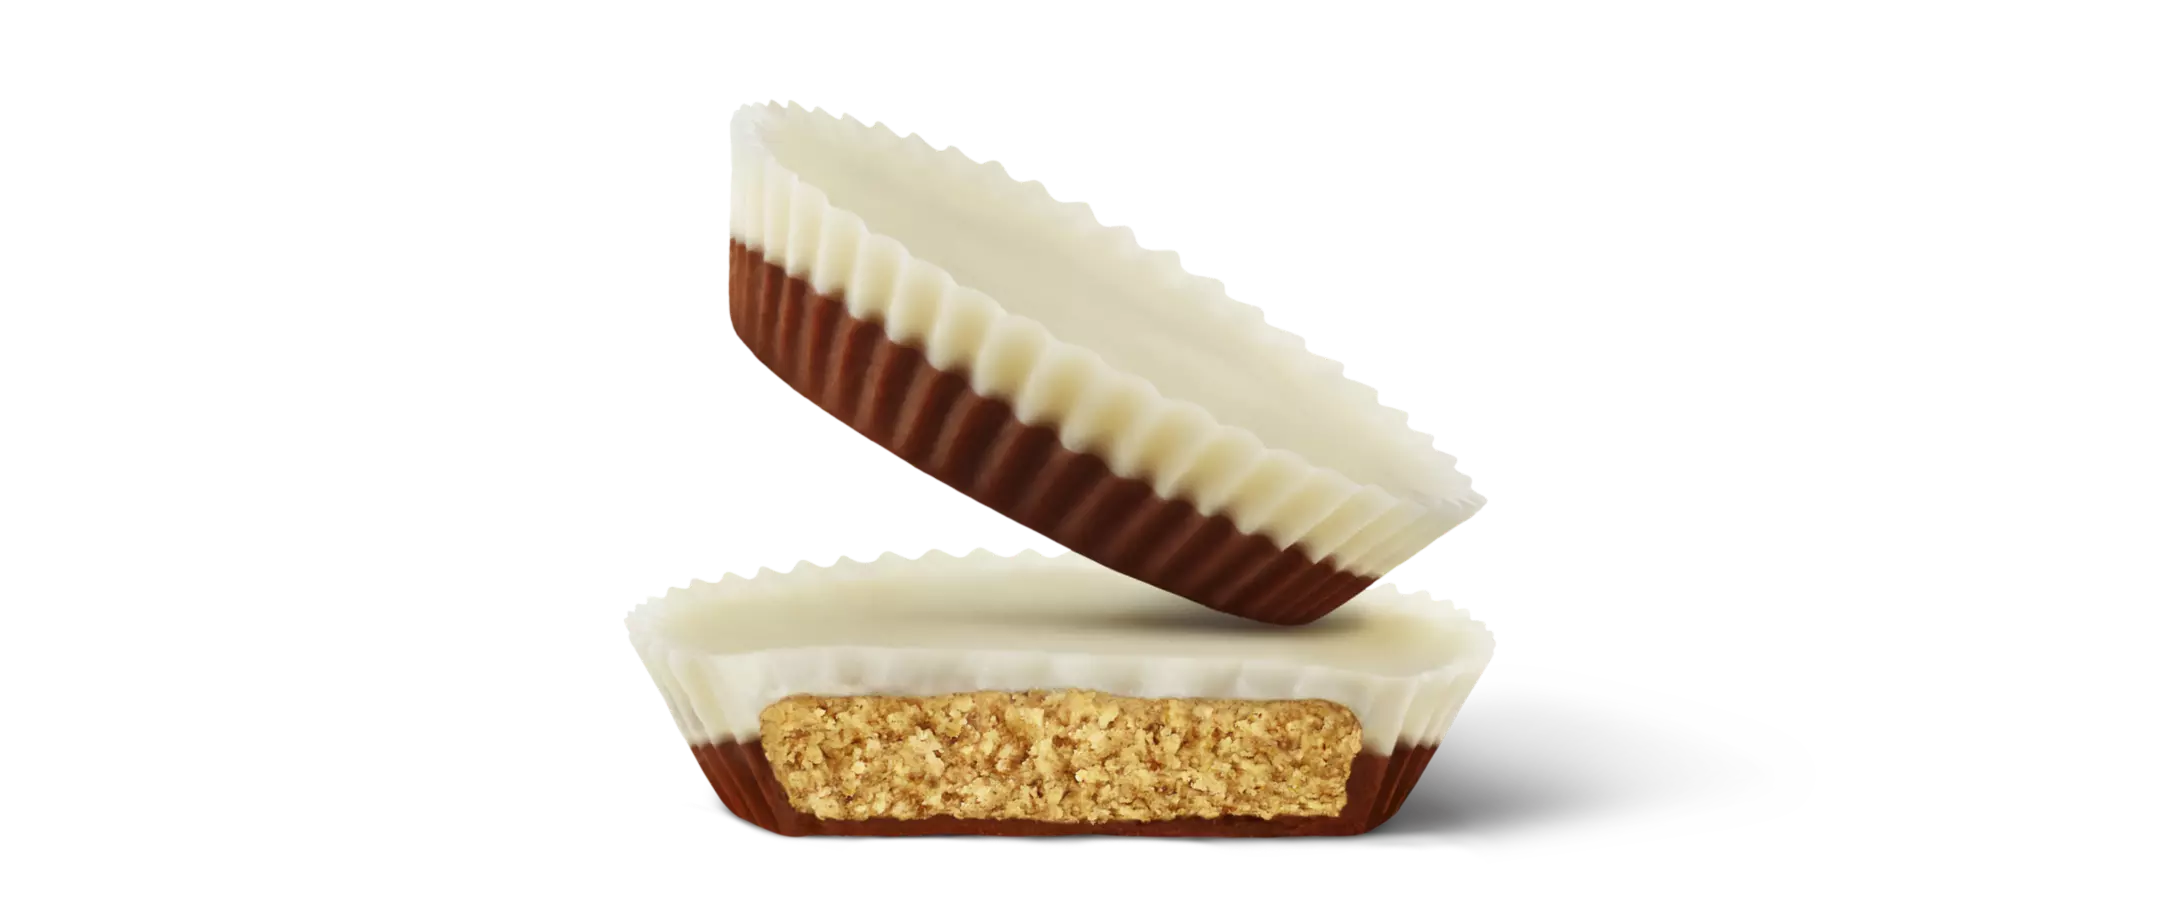 REESE'S Mallow-Top Marshmallow Creme with Milk Chocolate Peanut Butter Cups, 1.4 oz - Out of Package